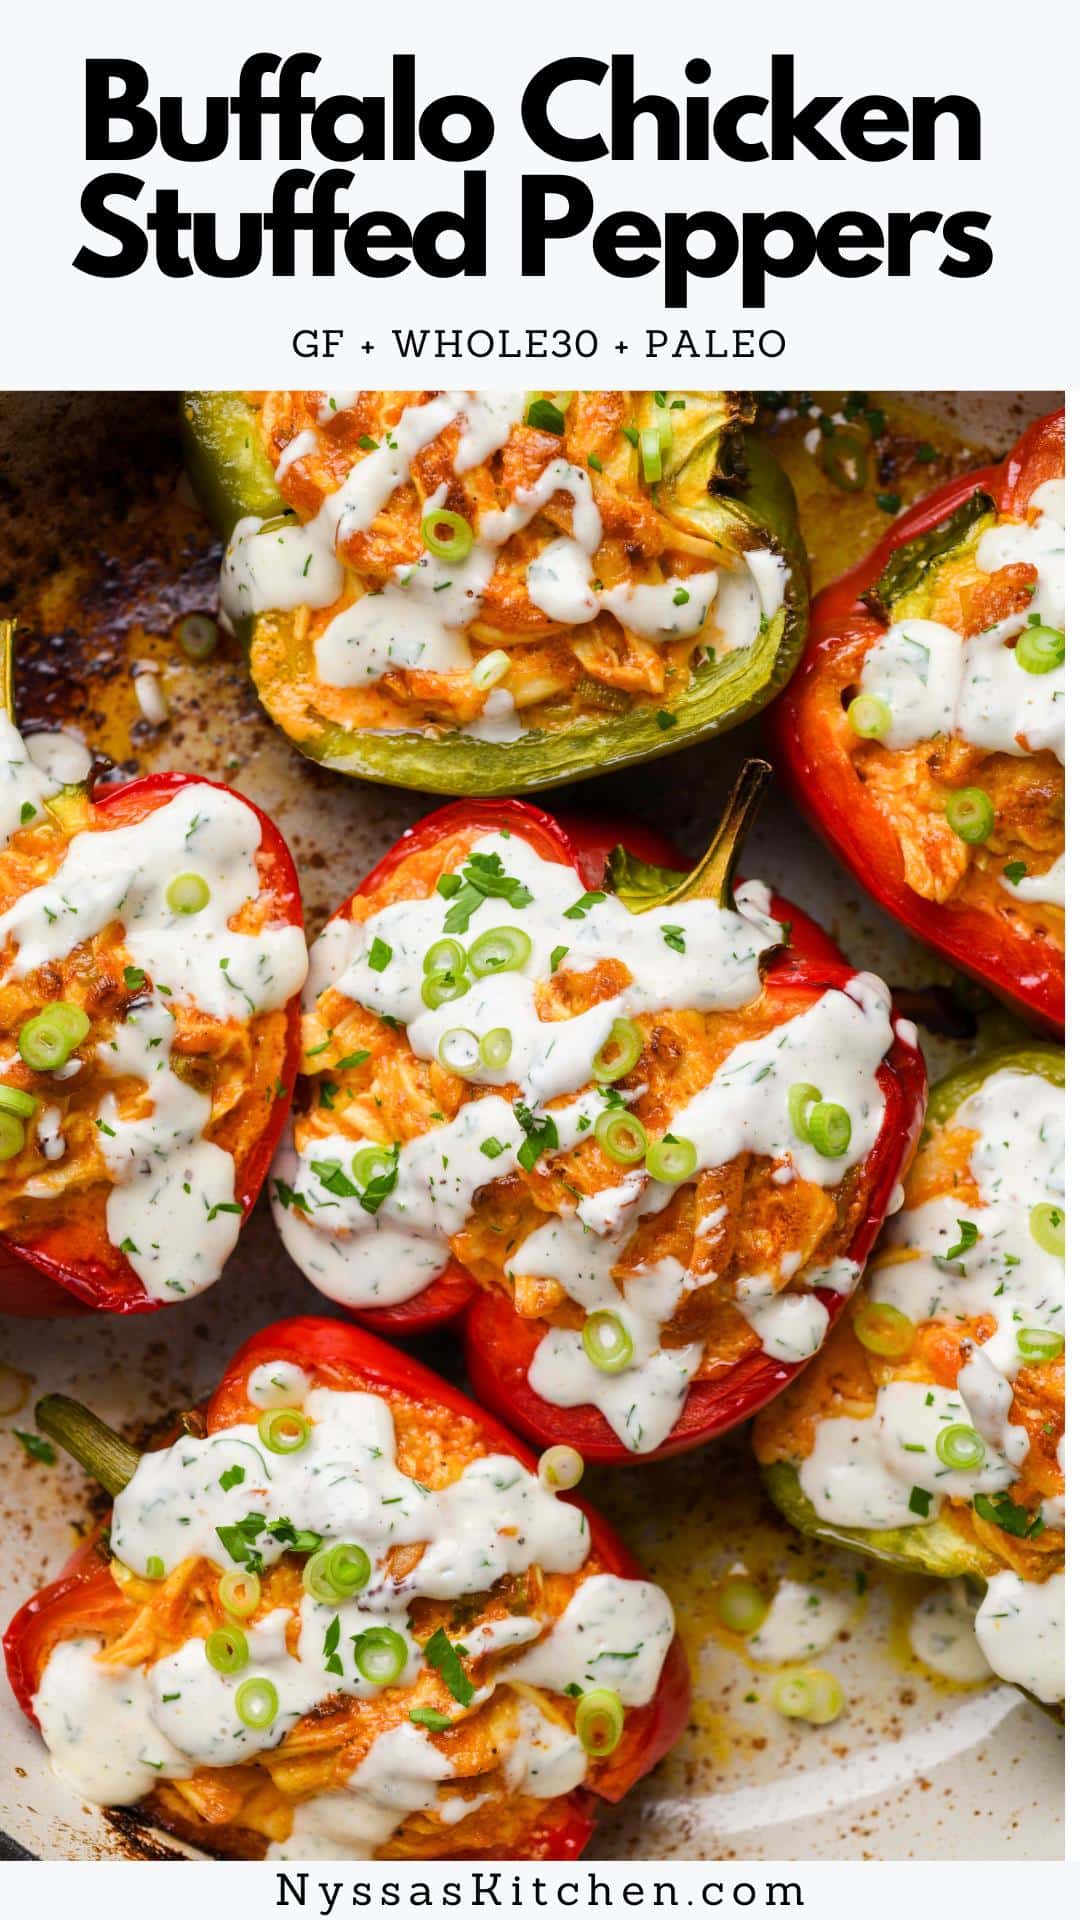 These buffalo chicken stuffed peppers are an easy, delicious dinner that everyone will love! Made with shredded chicken, spicy buffalo sauce, and topped with a generous drizzle of ranch dressing and fresh herbs. Healthy, flavorful, and easy to make! Whole30, paleo, gluten free, dairy free, and low carb / keto friendly.